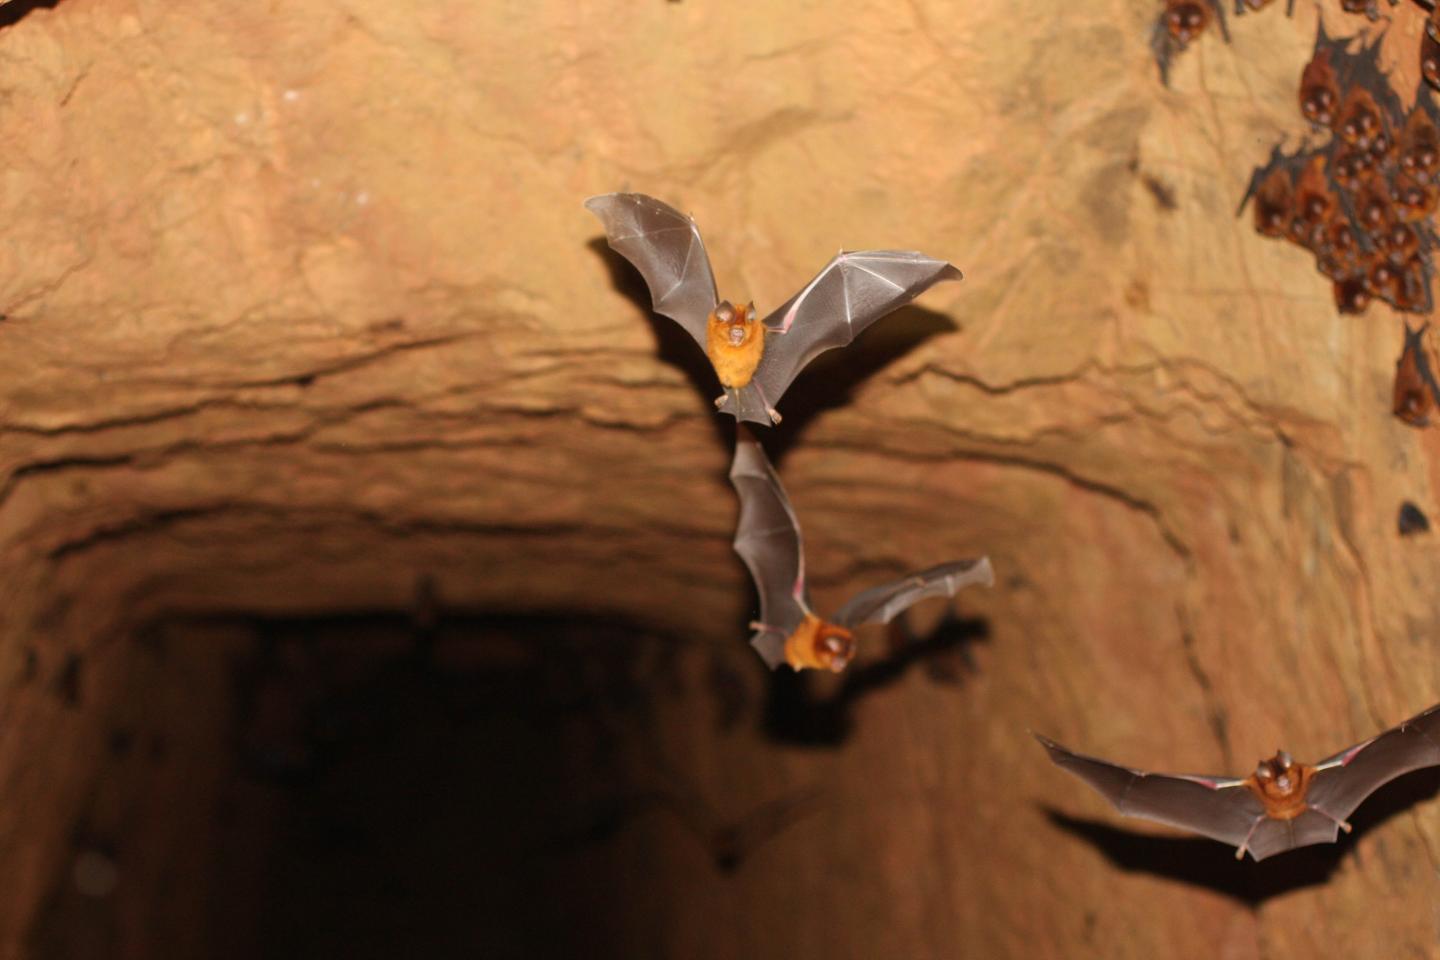 Hipposideridae: Four New Species Of Bats Revealed, Cousins Of The Horseshoe Bats Behind SARS-CoV-2